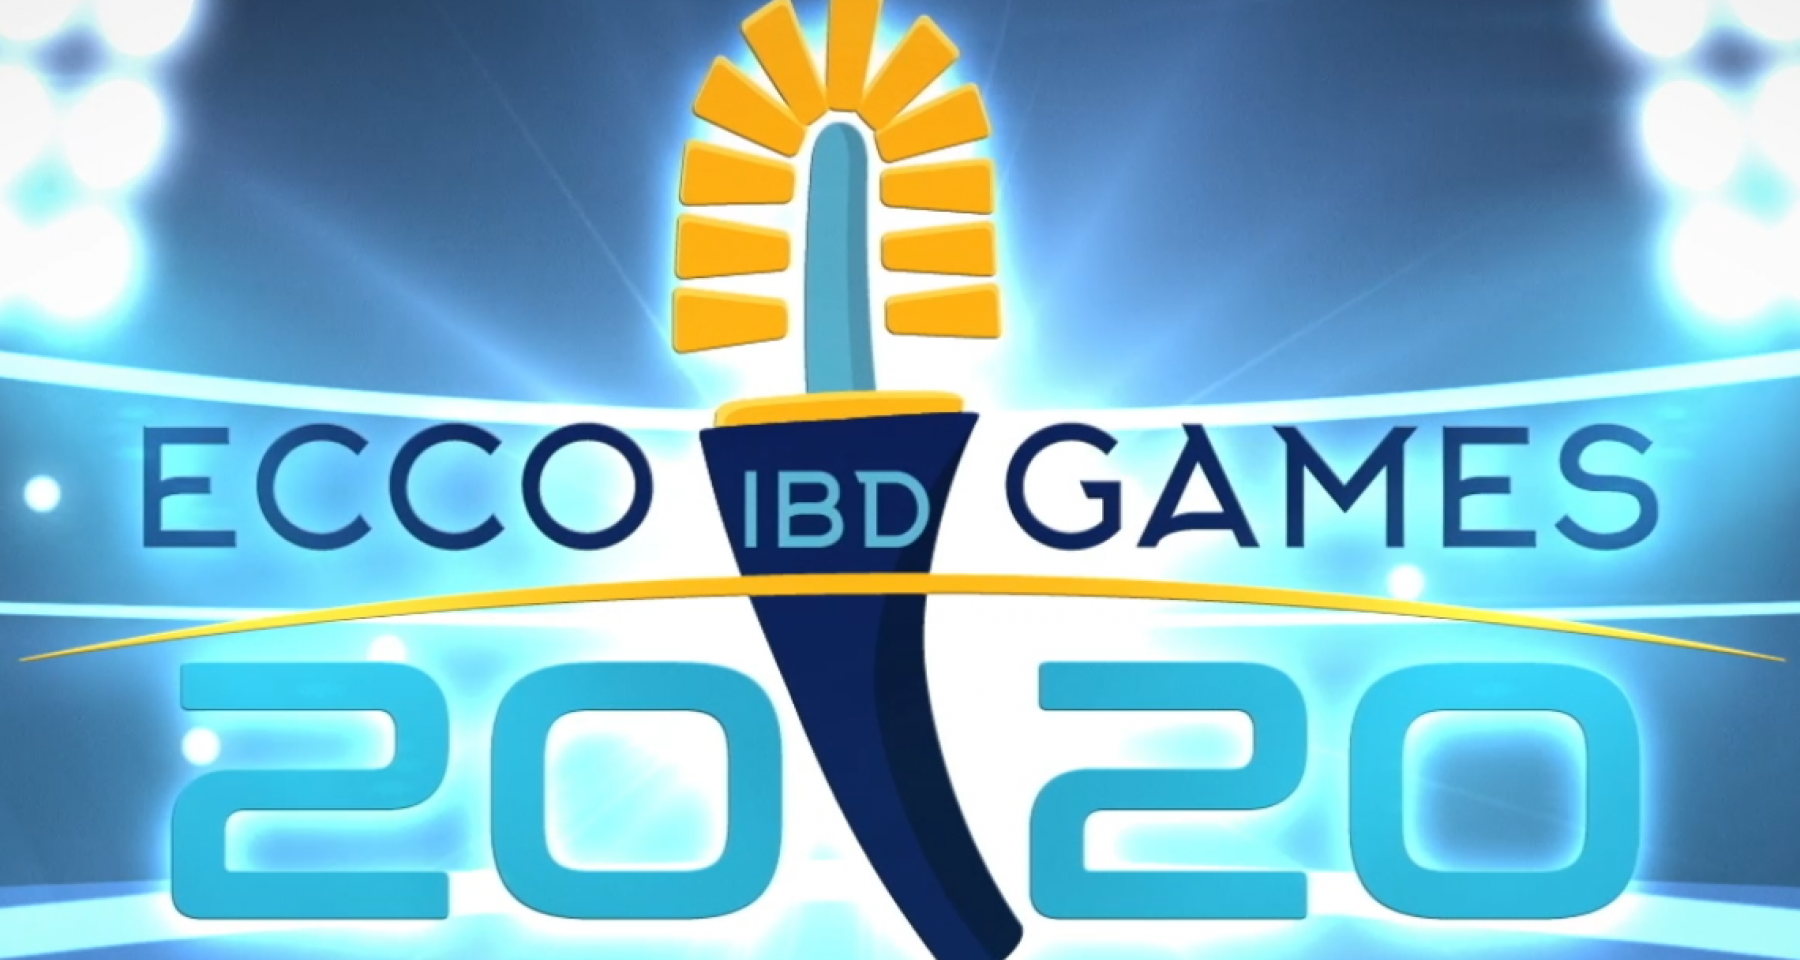 Watch the ECCO'20 Teaser!